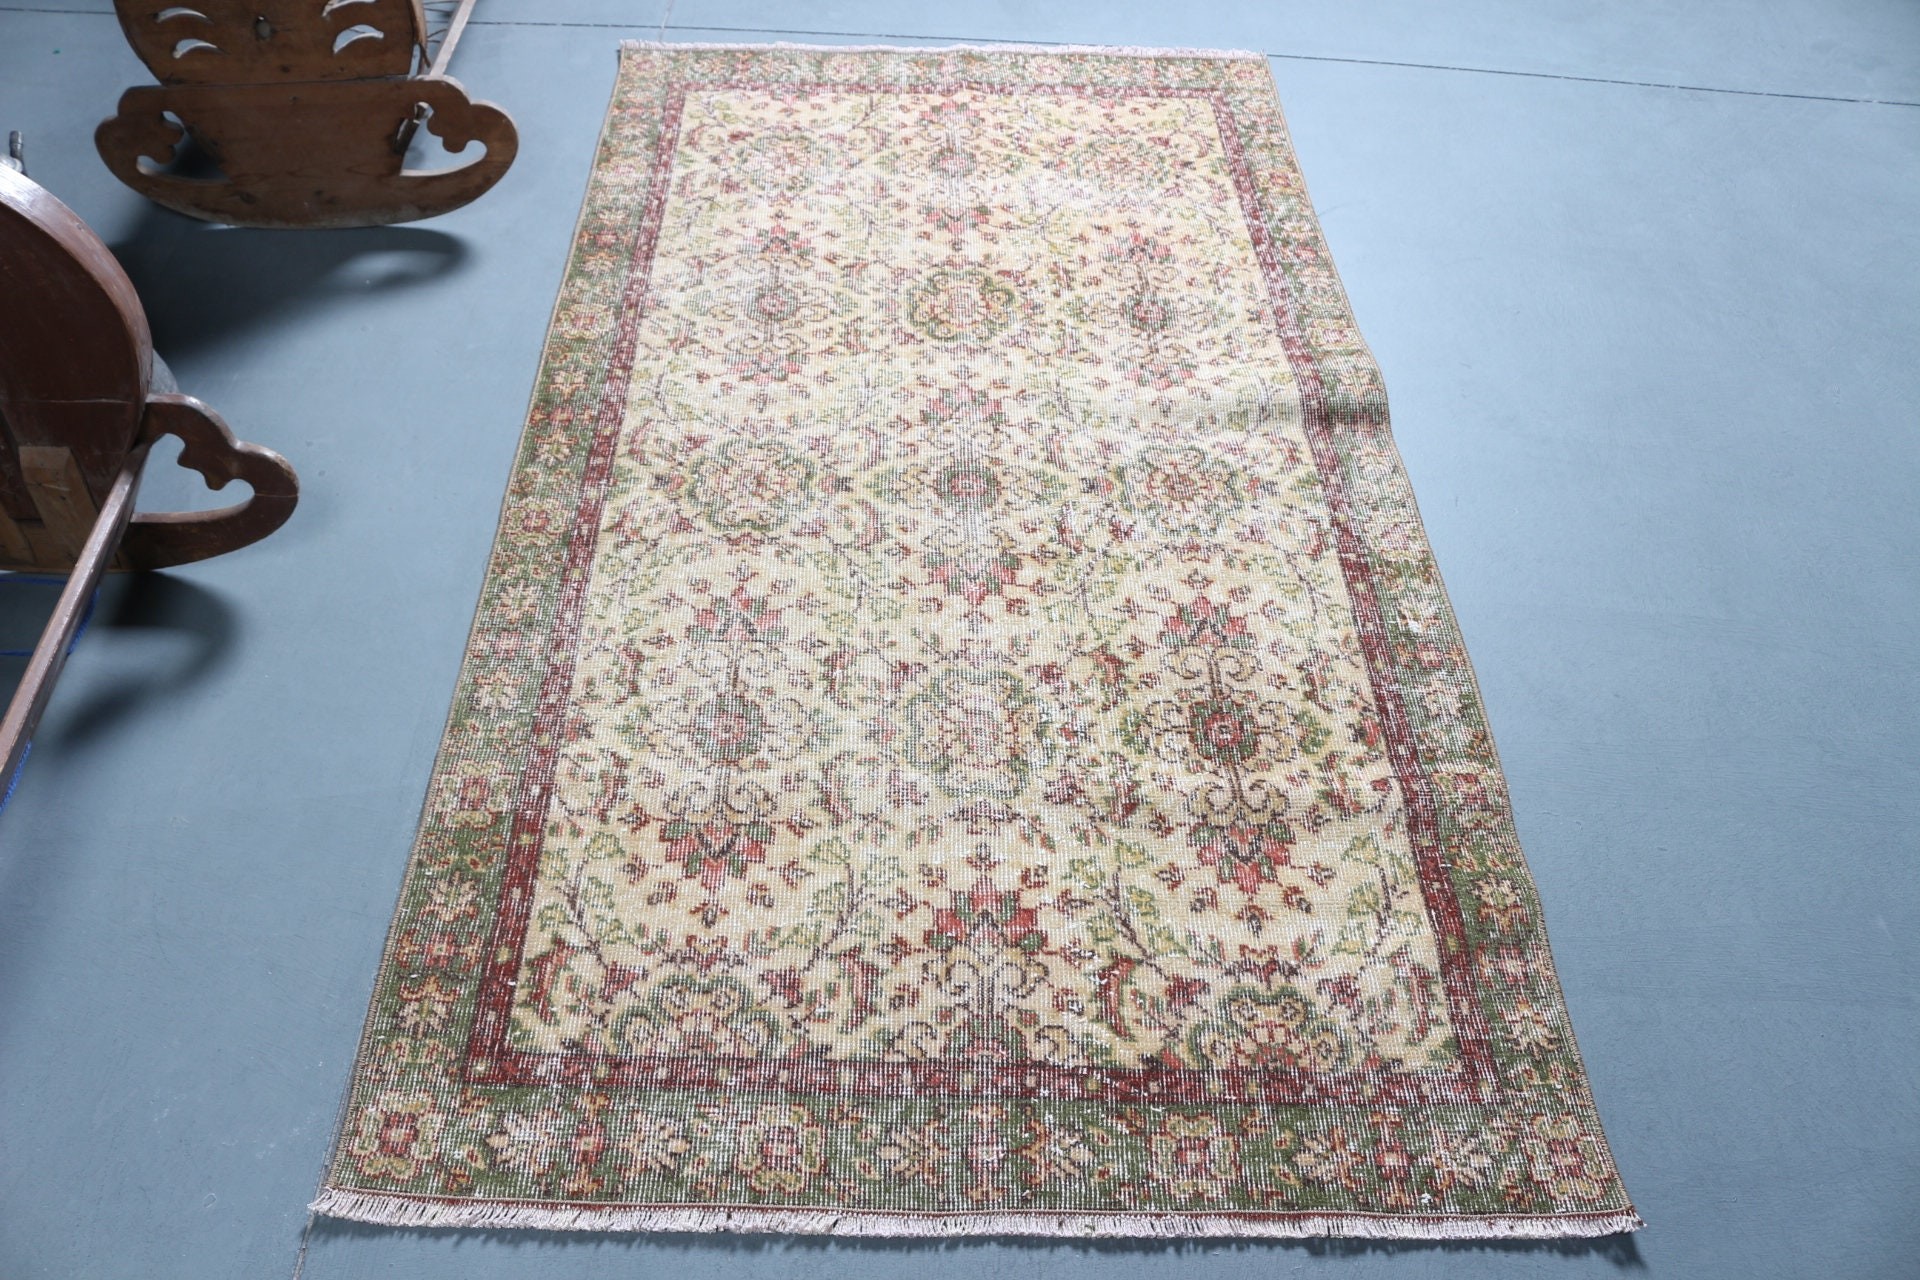 Turkish Rug, Vintage Rug, Entry Rugs, Kitchen Rug, Rugs for Kitchen, 3.5x6.6 ft Accent Rug, Home Decor Rugs, Bedroom Rugs, Beige Wool Rug